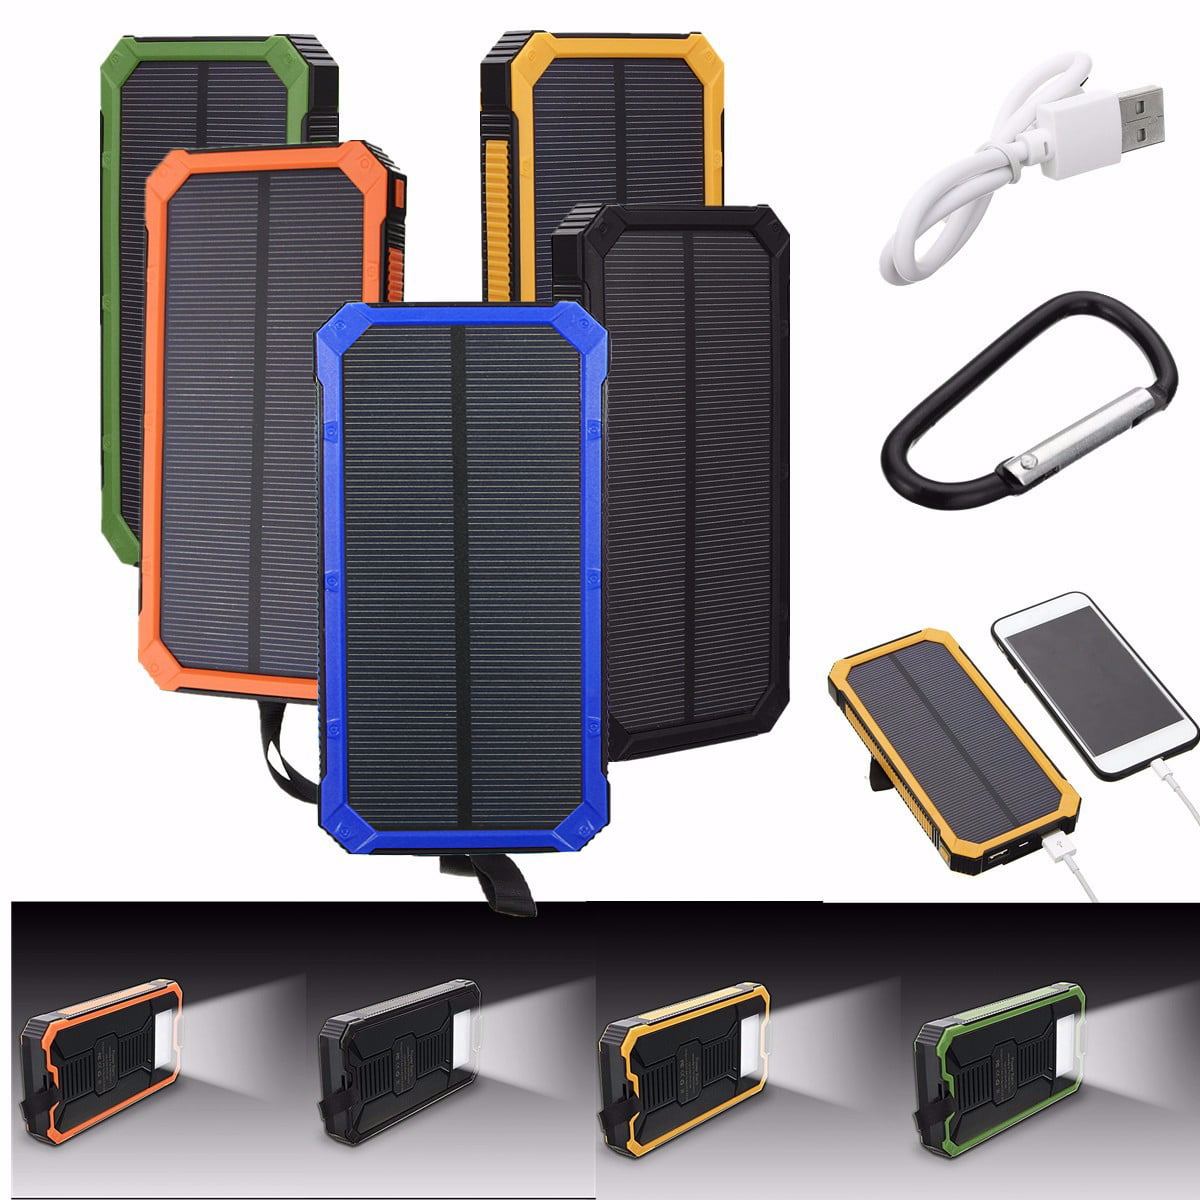 Solar Charger 12000mAh Waterproof Dual USB Port LED Flashlight Outdoor Carabiner Dustproof Shockproof Emergency for Hiking Camping Backpacking Trip compatible with Smartphones iPhone Android and other USB-Charged Devices 